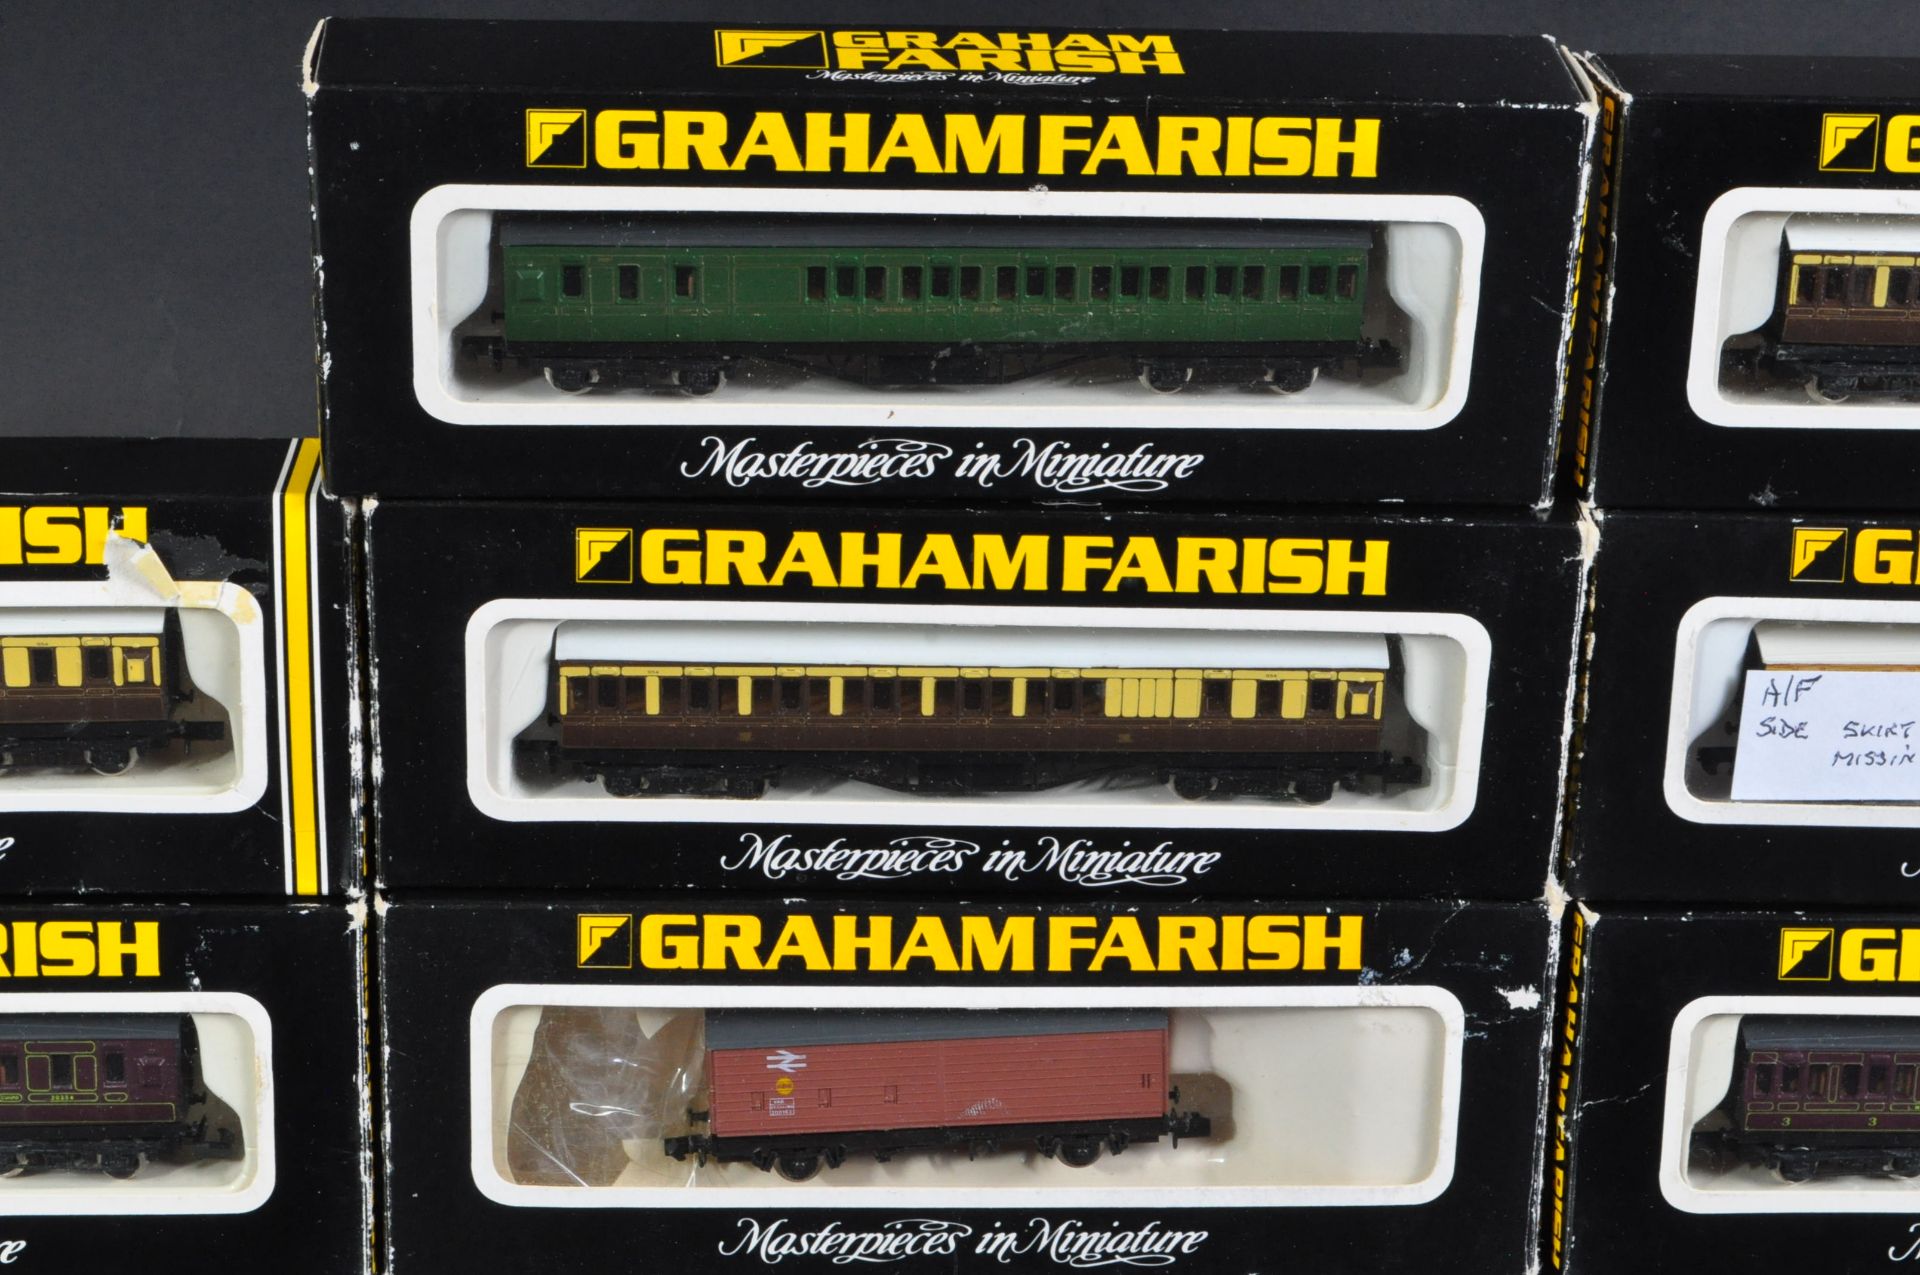 COLLECTION OF GRAHAM FARISH N GAUGE MODEL RAILWAY CARRIAGES - Image 3 of 5